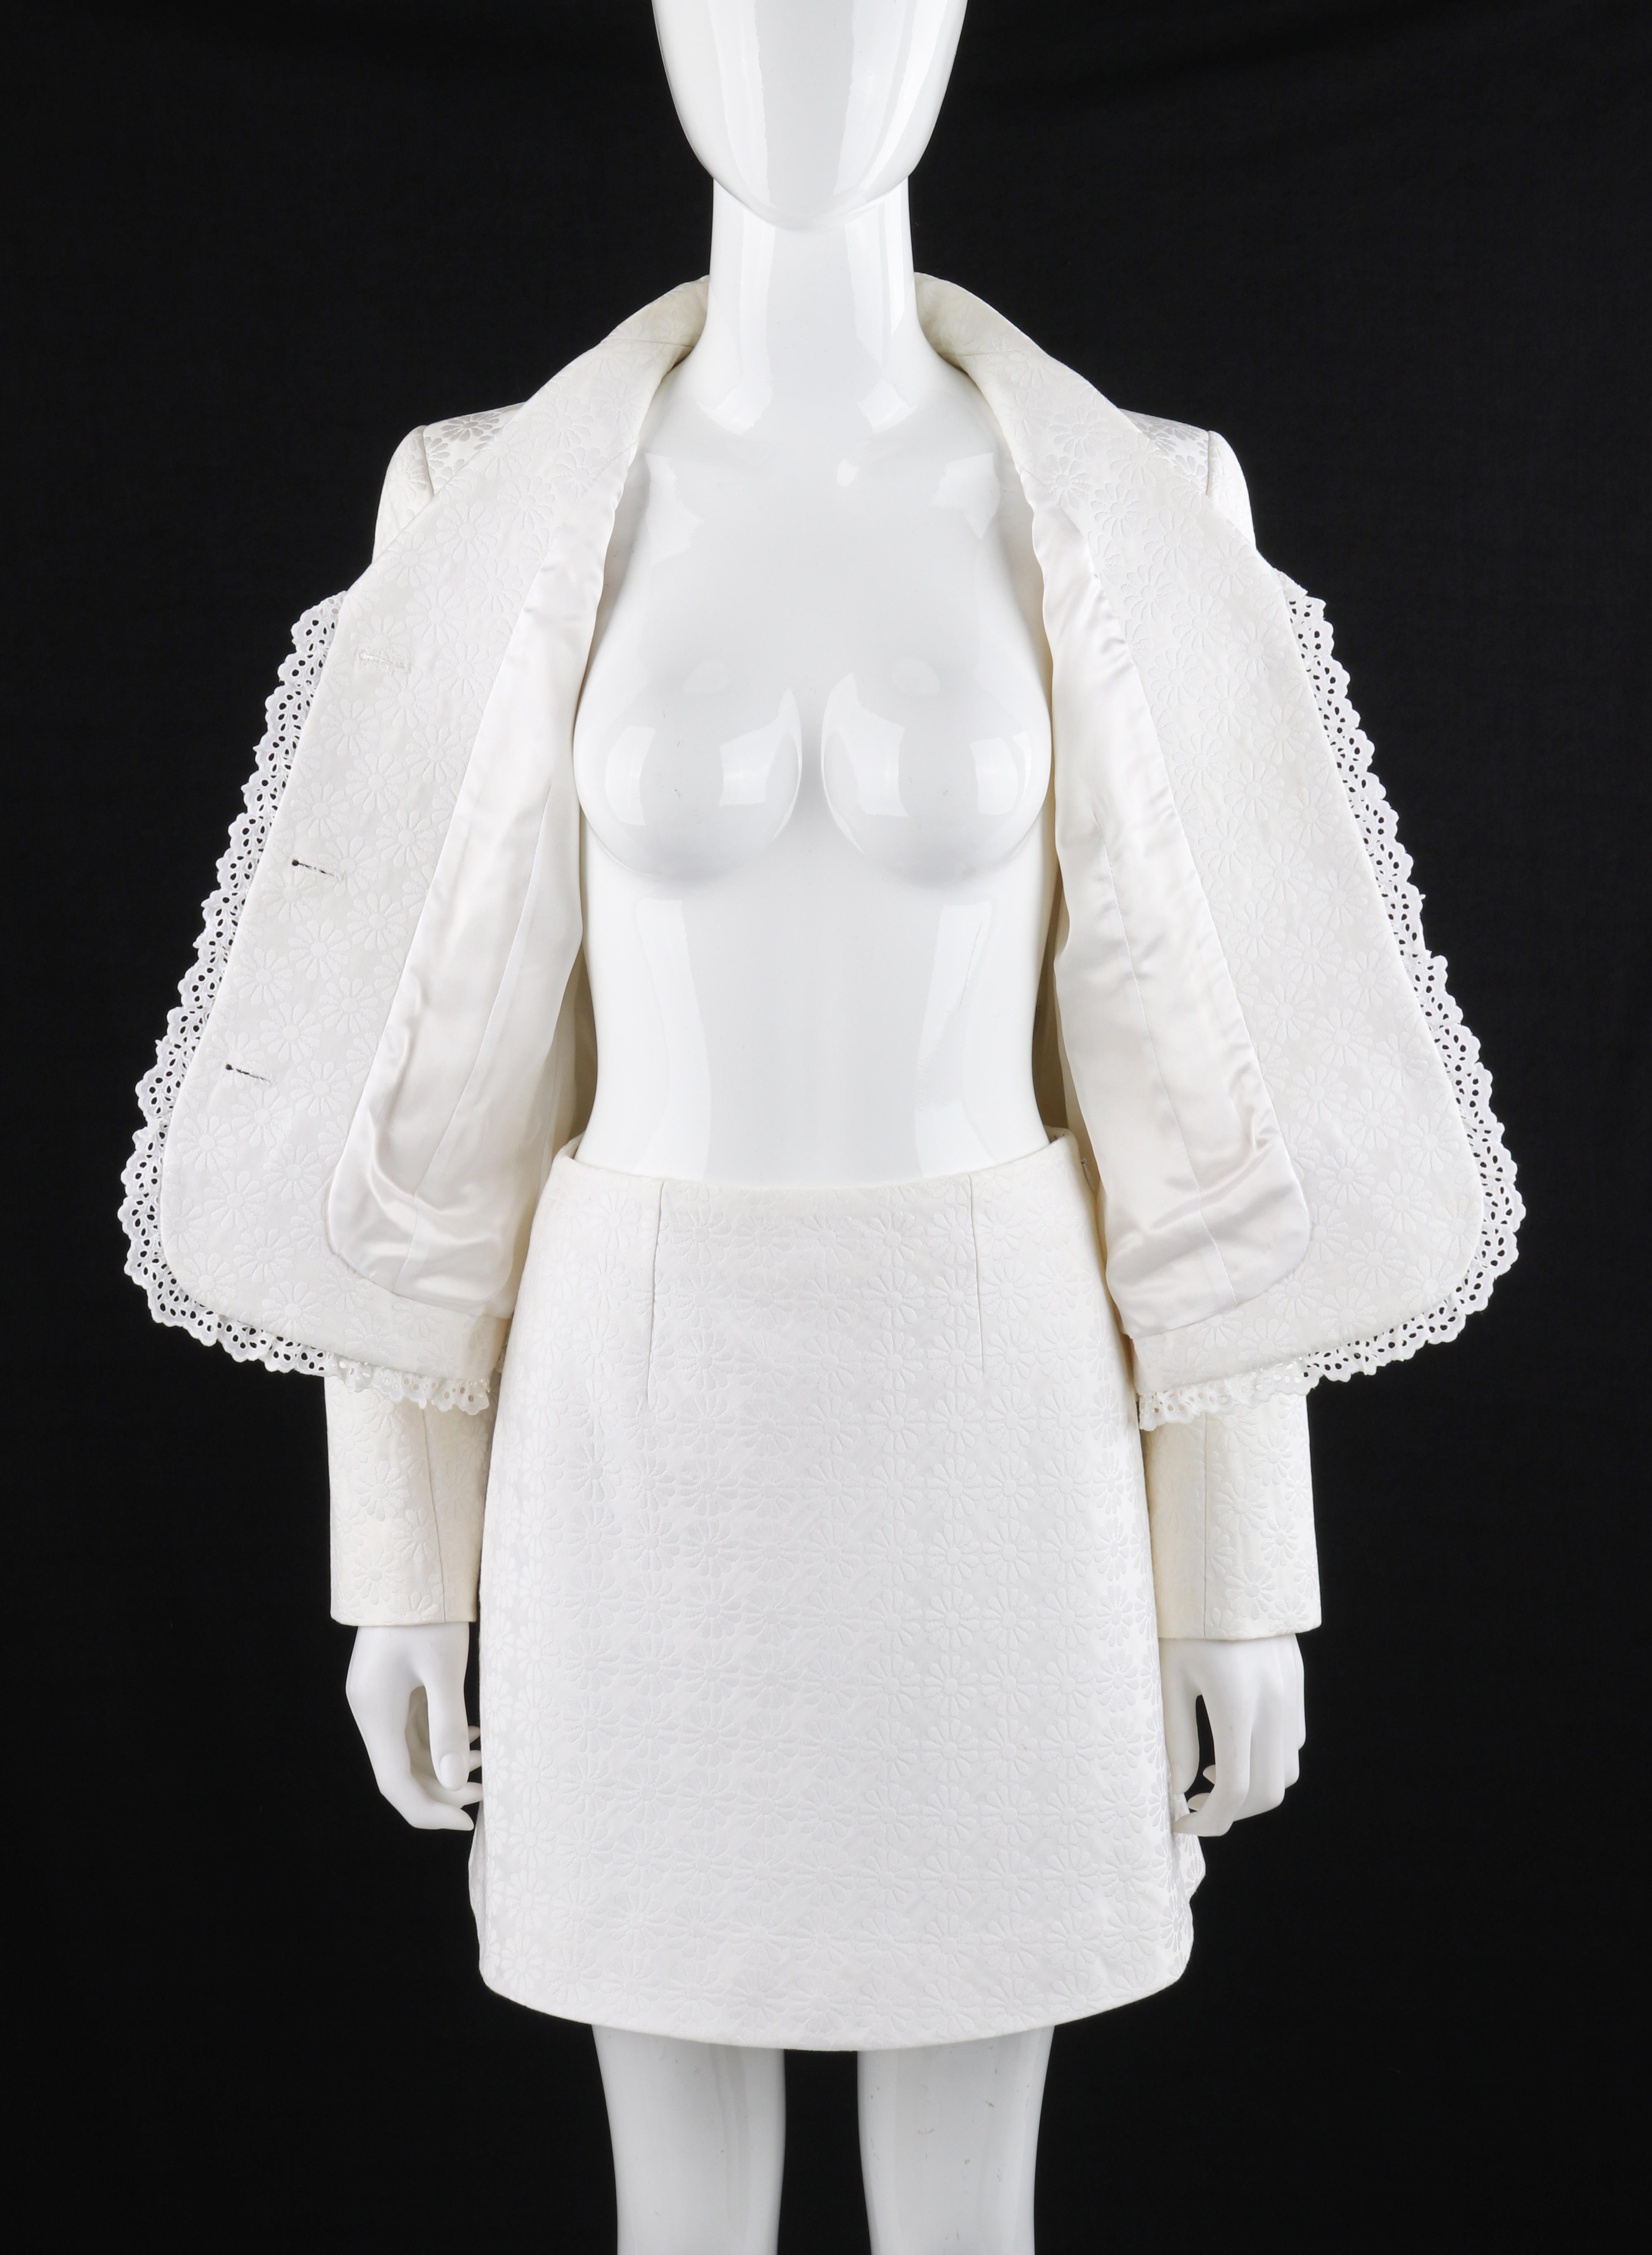 Women's GIVENCHY A/W 1996 JOHN GALLIANO White Floral Brocade Lace Skirt Suit Blazer Set